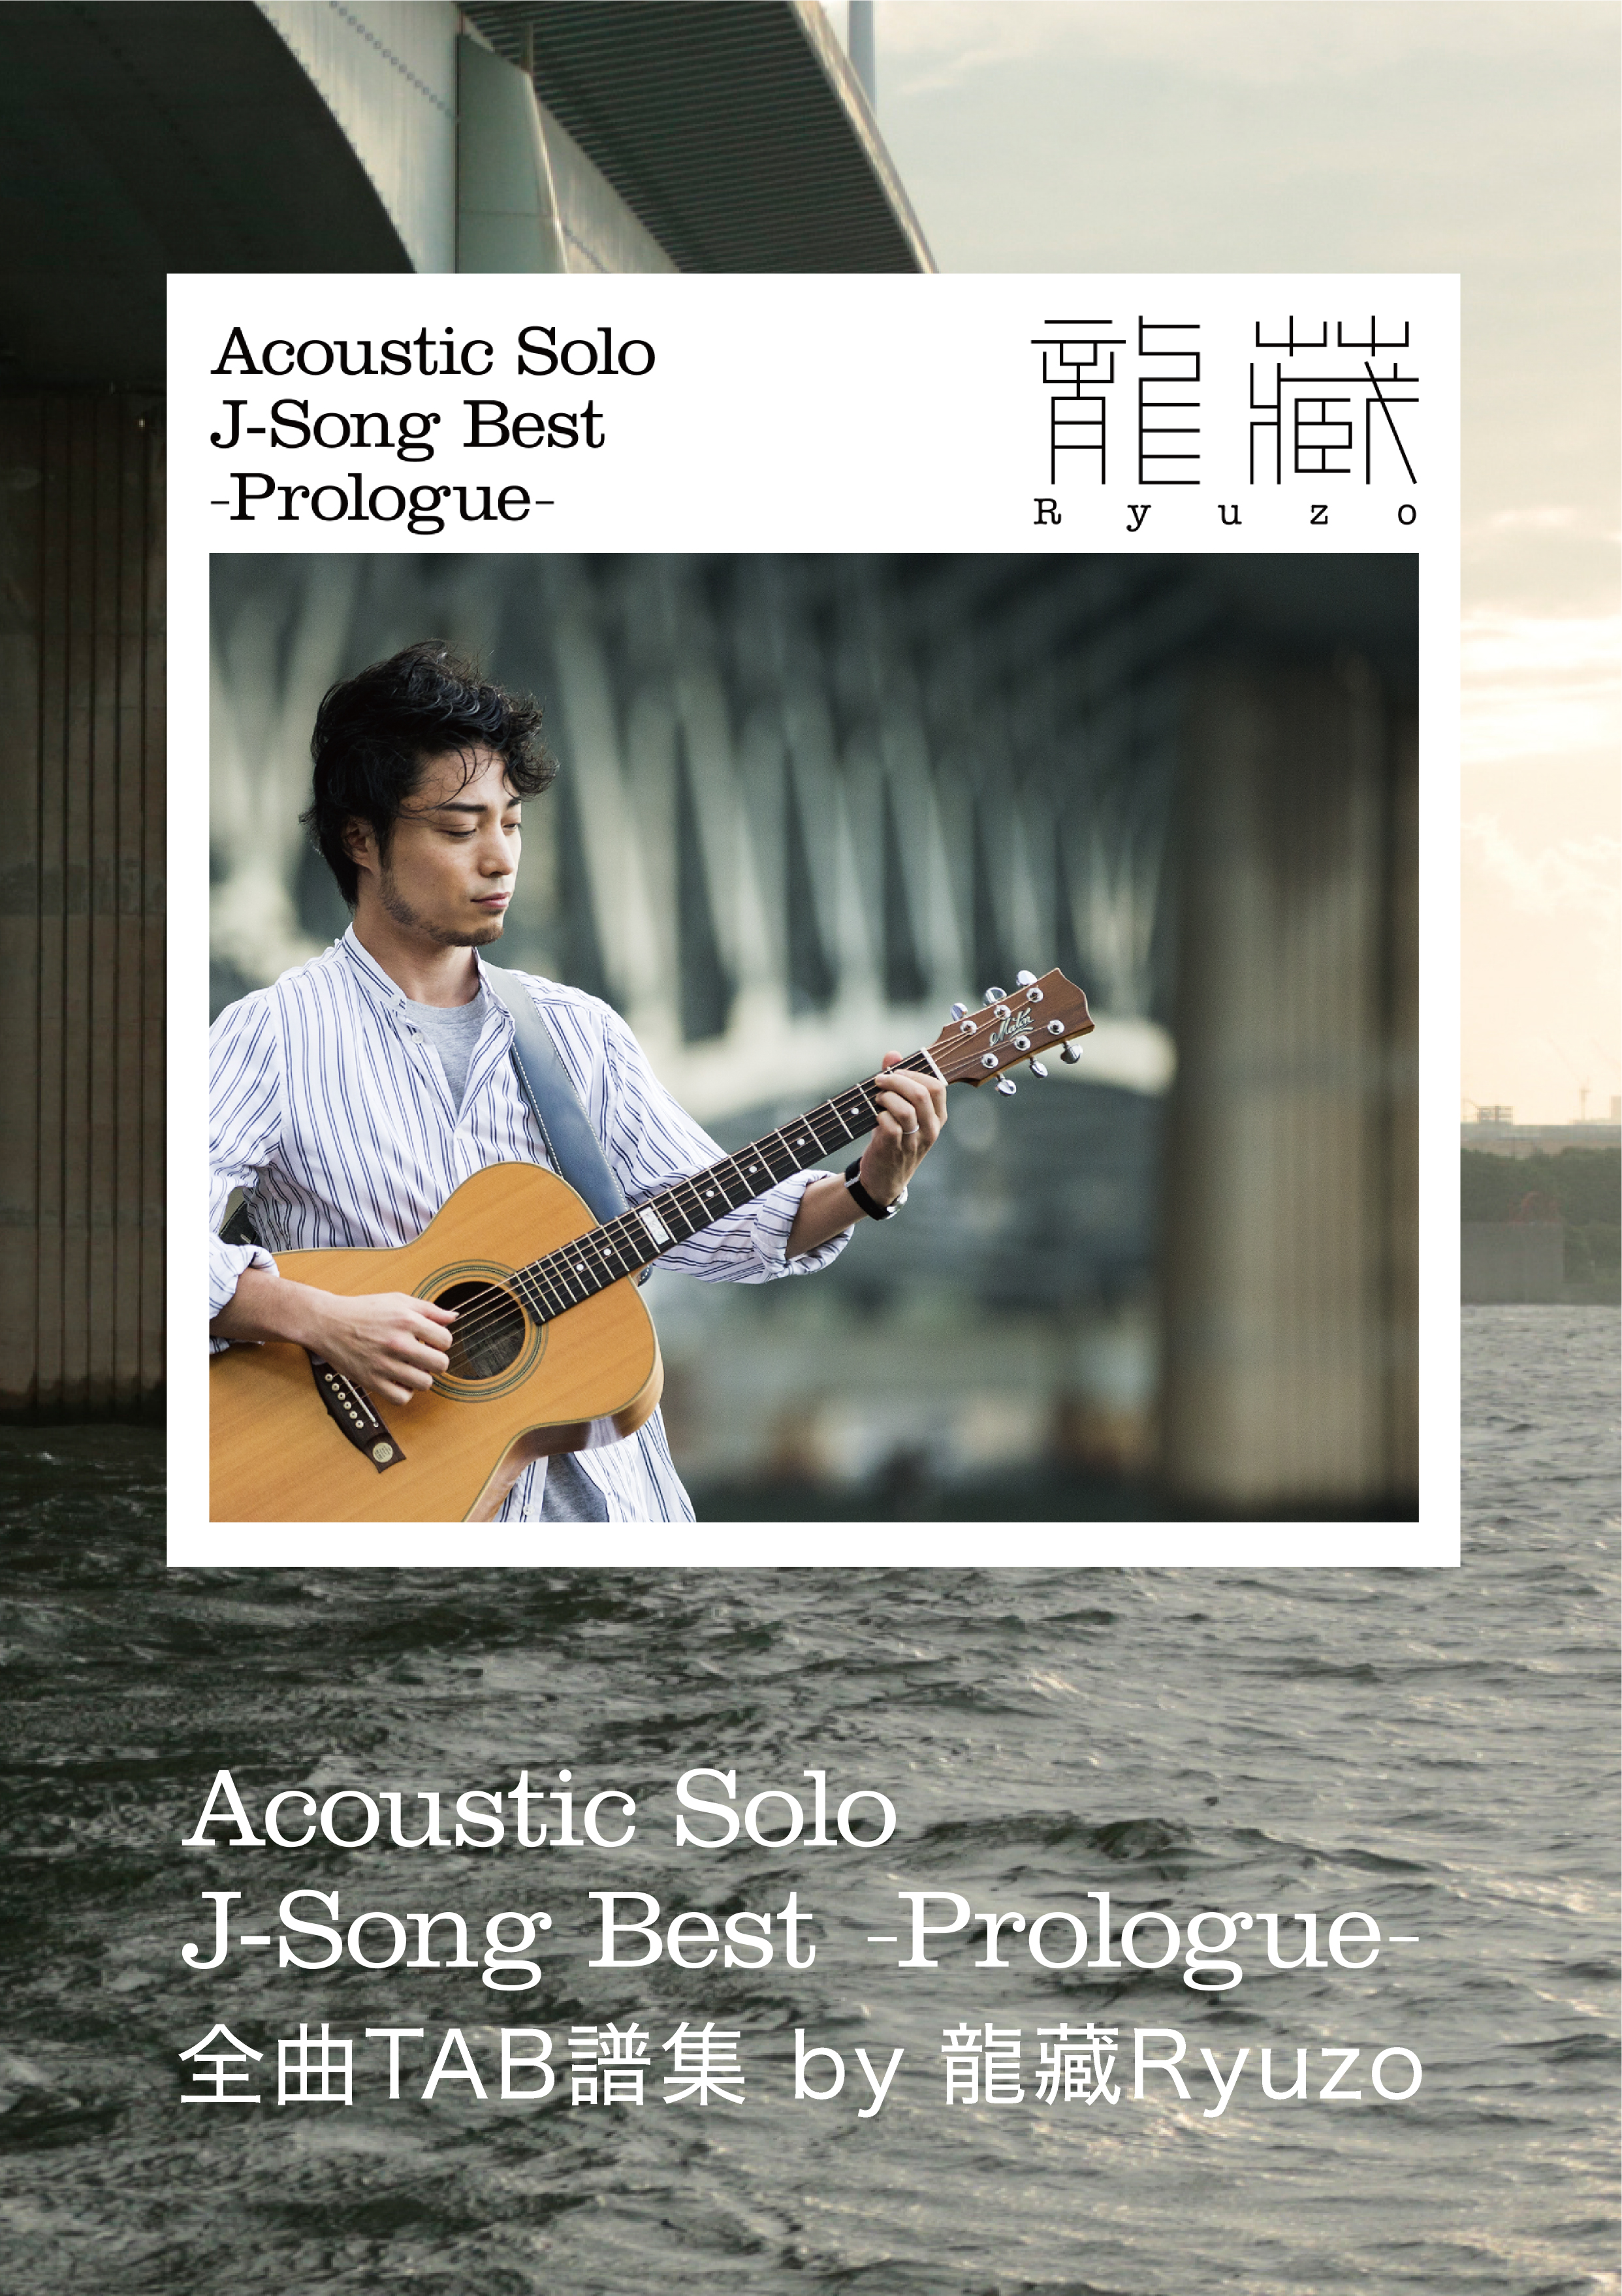 Acoustic Solo J-Song Best-Prologue- 全曲TAB譜集 by 龍藏Ryuzo【ネコポス発送】